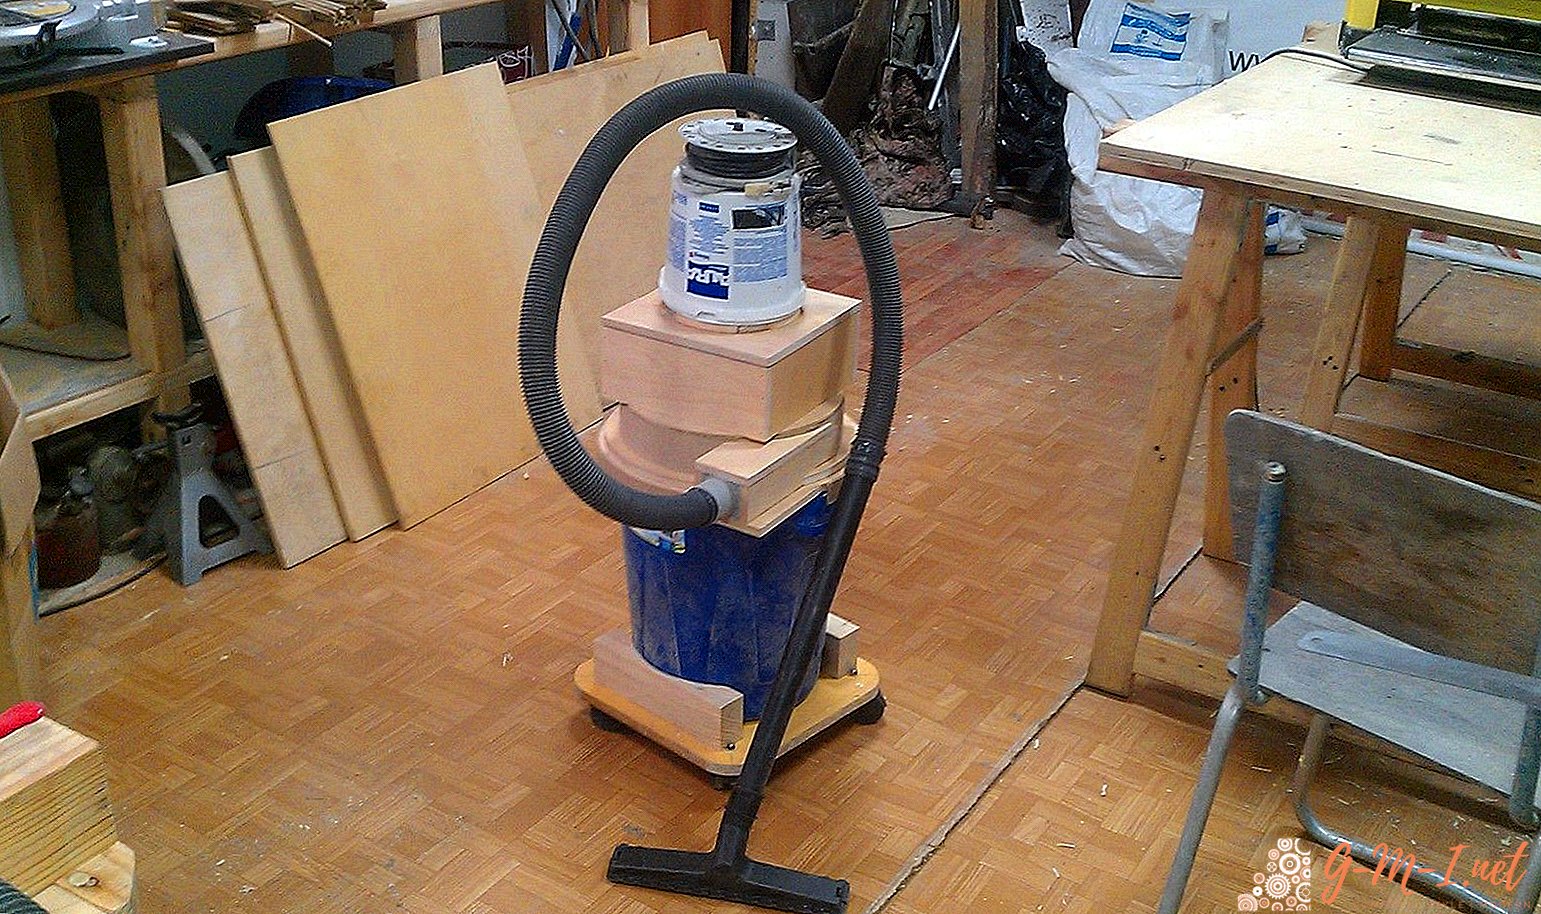 DIY cyclone filter for a vacuum cleaner